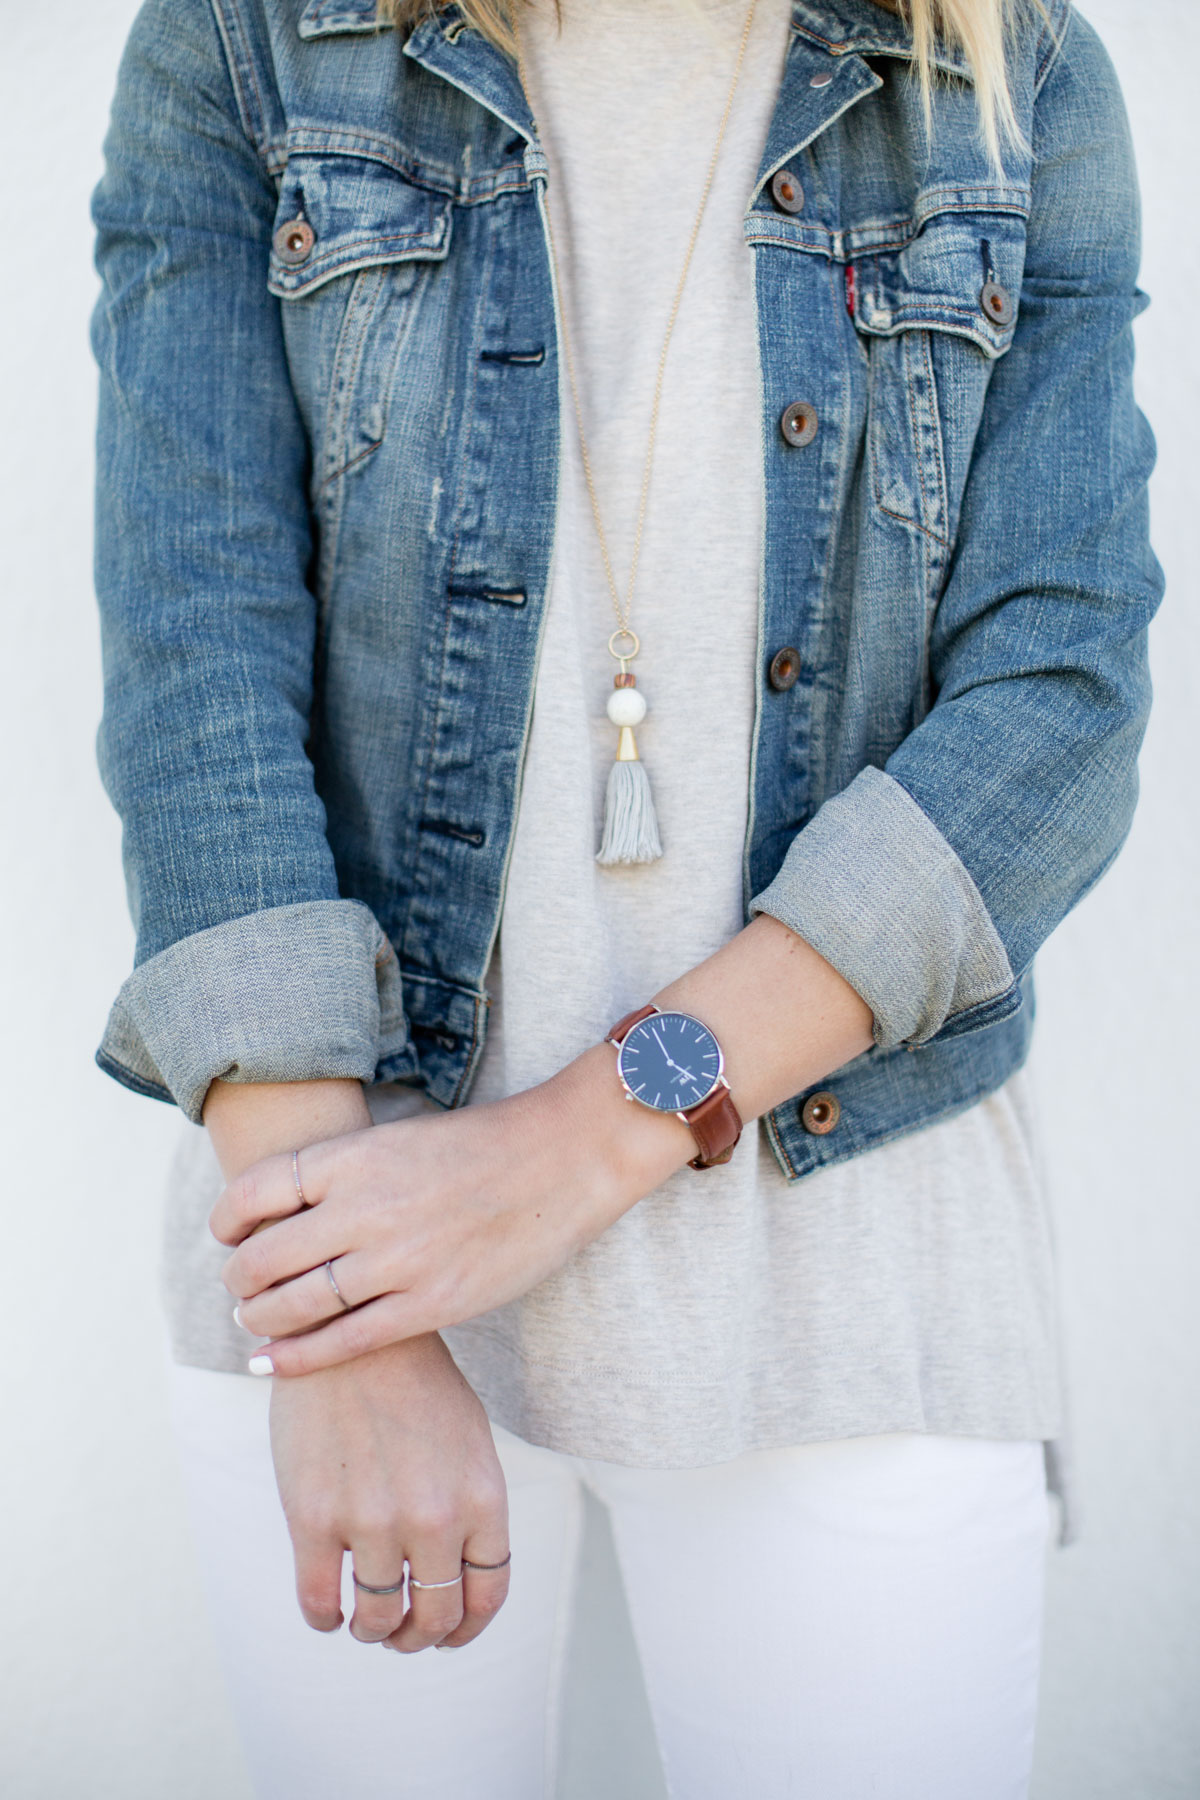 basic outfits with denim jacket and tassel necklace